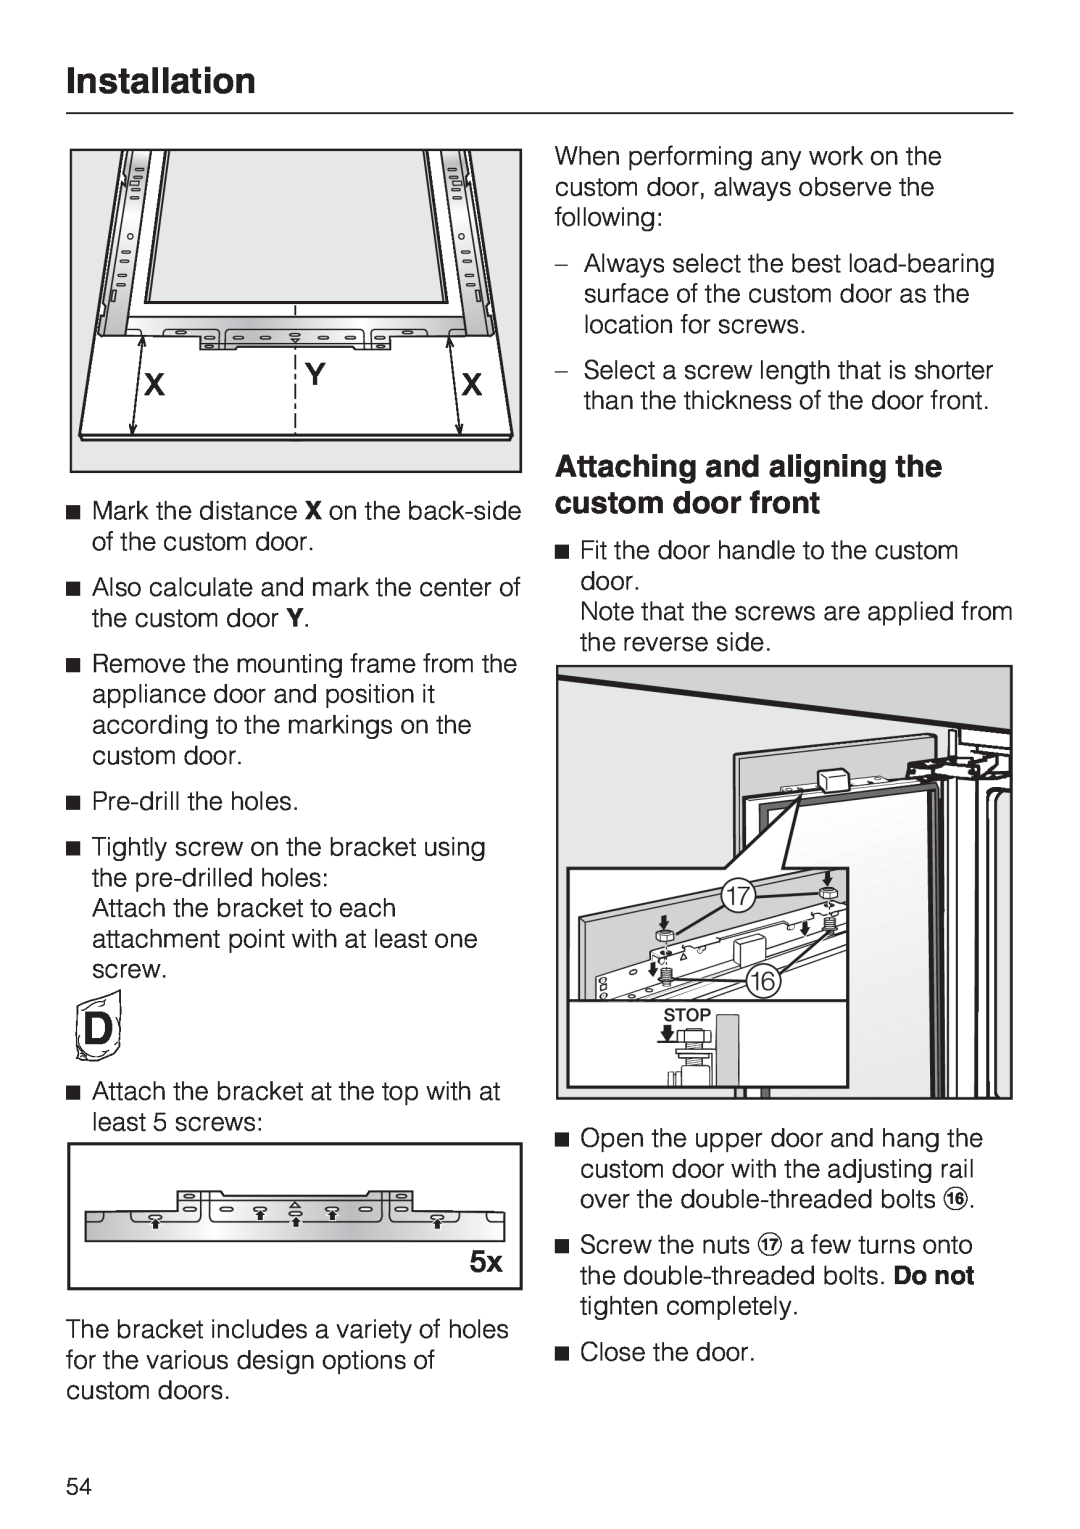 Miele KWT1611VI, KWT1601VI installation instructions Attaching and aligning the, custom door front, Installation 